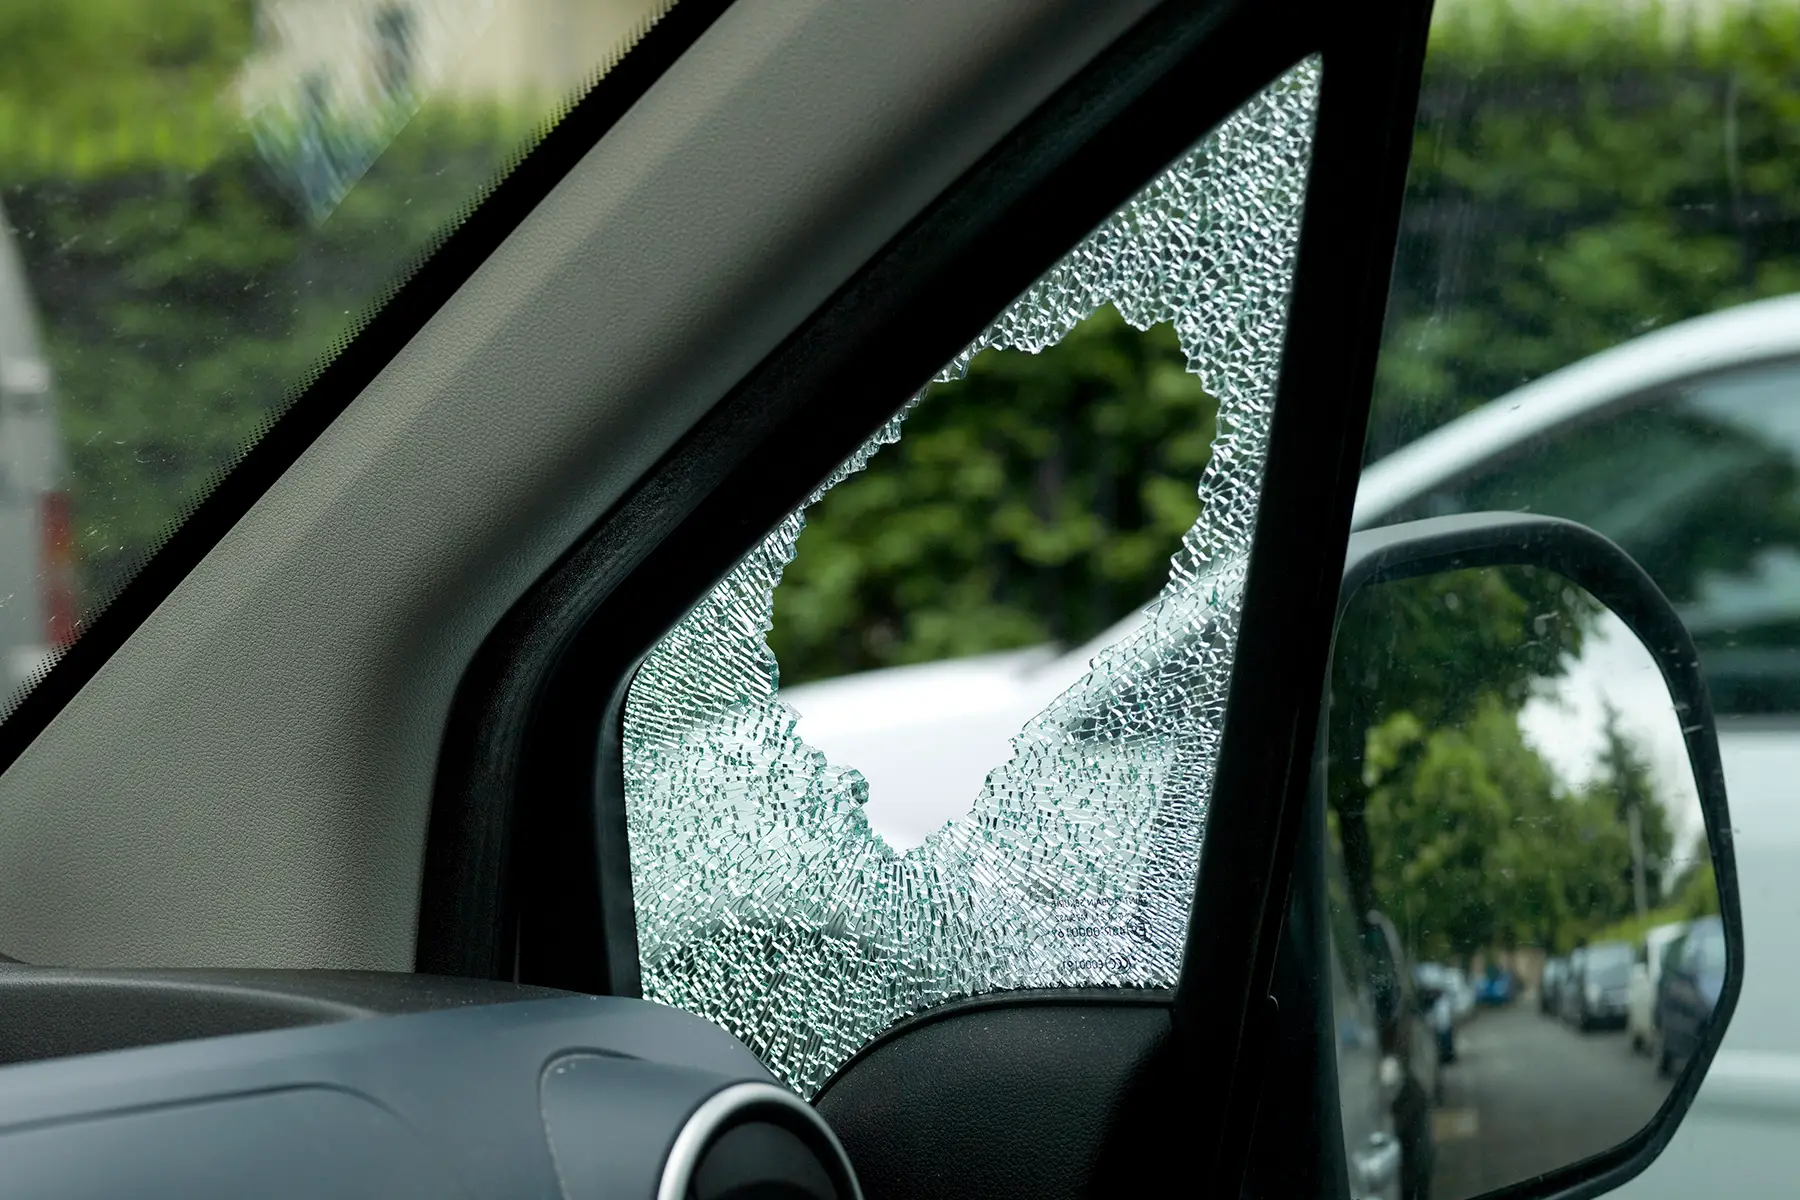 View from inside a car parked on the street with its side window smashed open